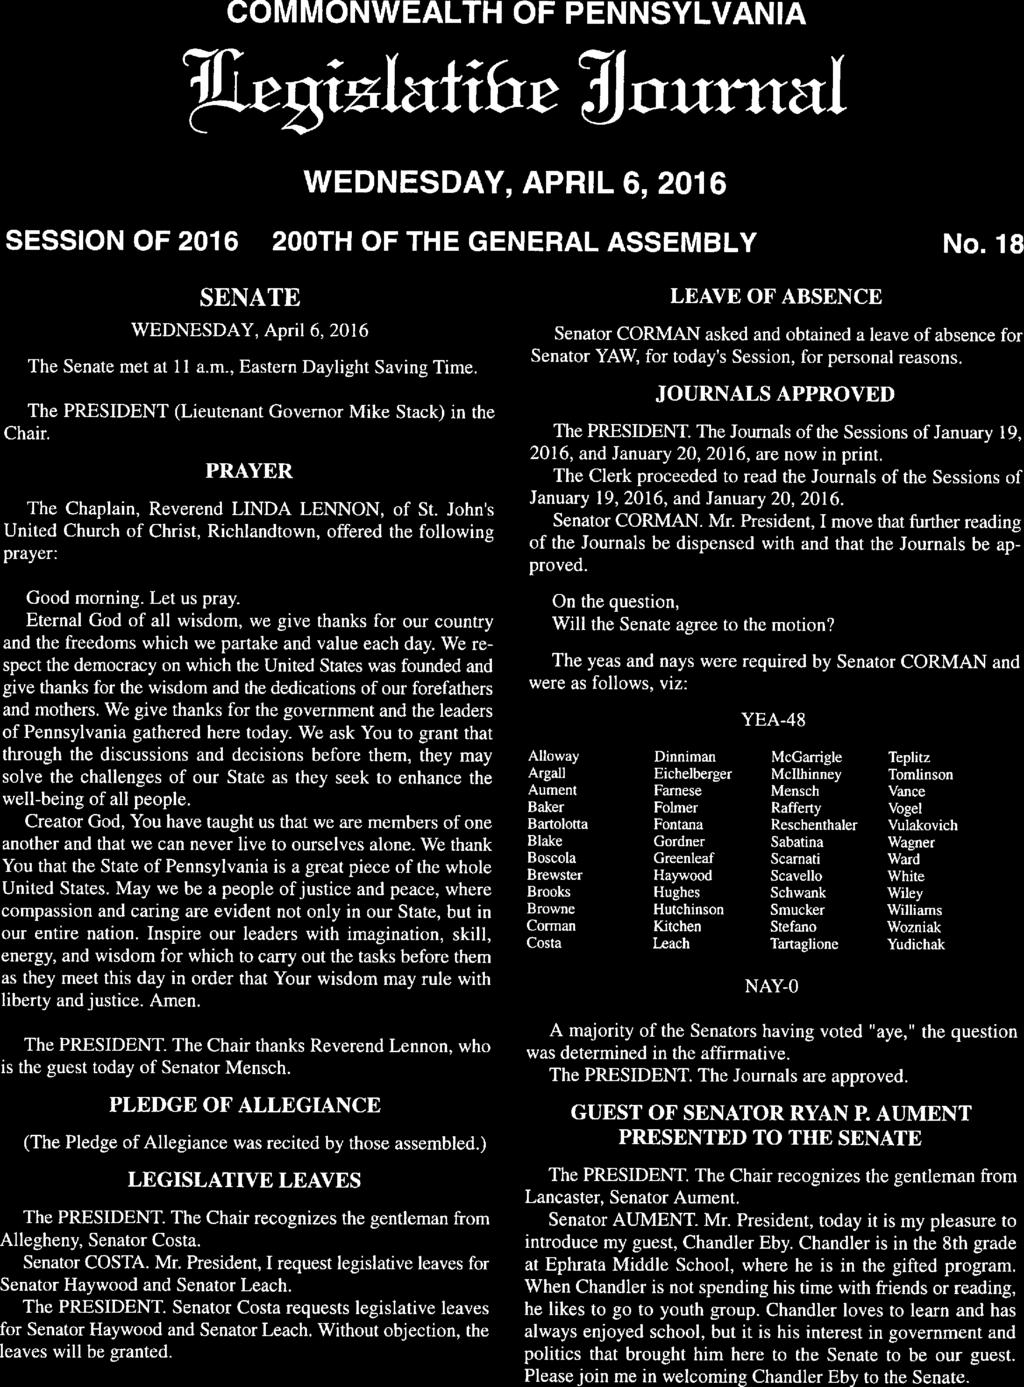 COMMONWEALTH OF PENNSYLVANIA JU,gislaf ifai 11ournal WEDNESDAY, APRIL 6, 2016 SESSION OF 2016 200TH OF THE GENERAL ASSEMBLY No.